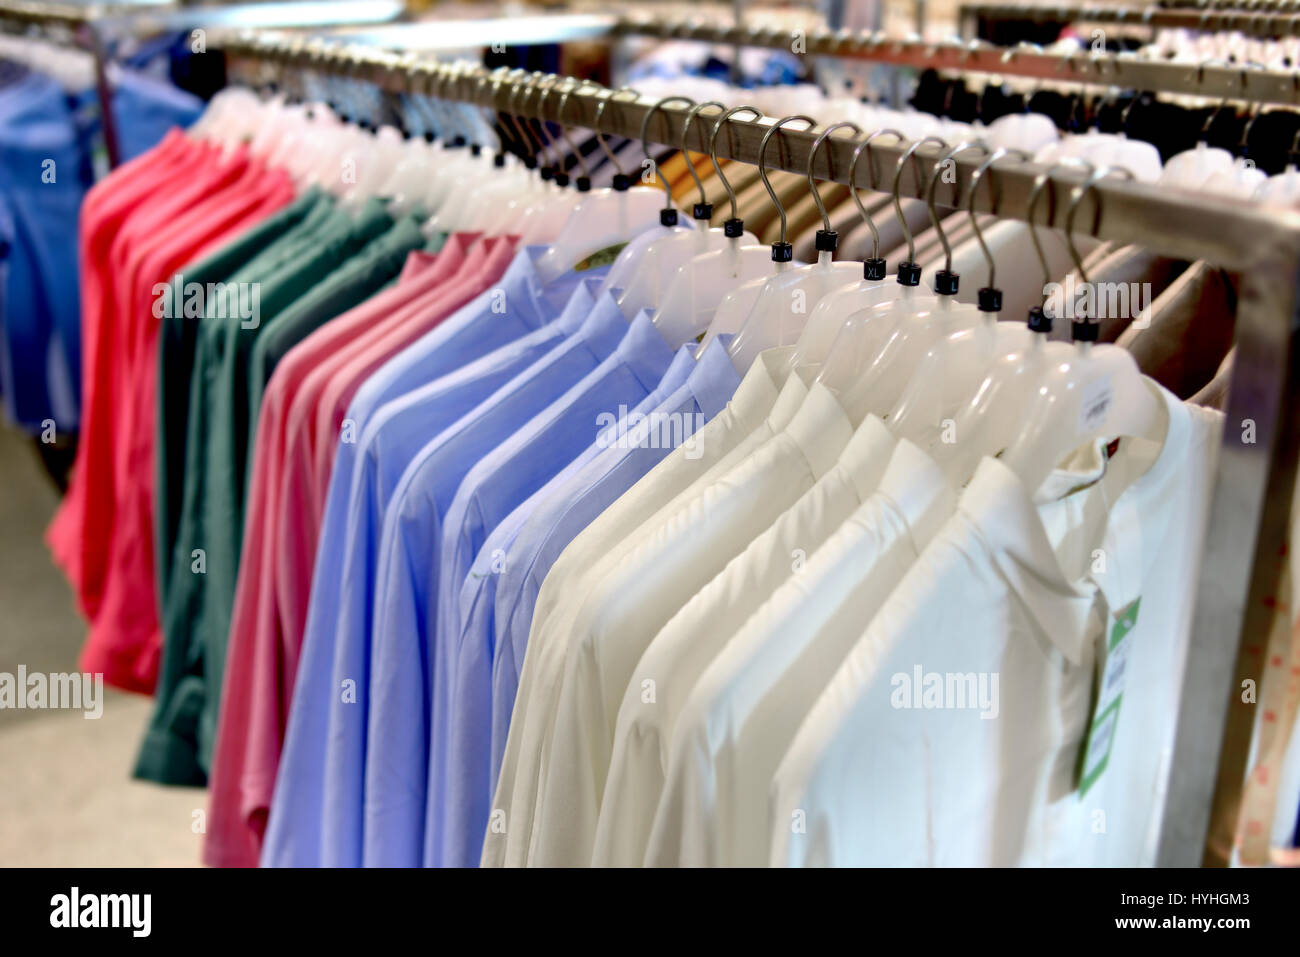 Clothes collection in hangers for sale photo in indoor low lighting. Stock Photo